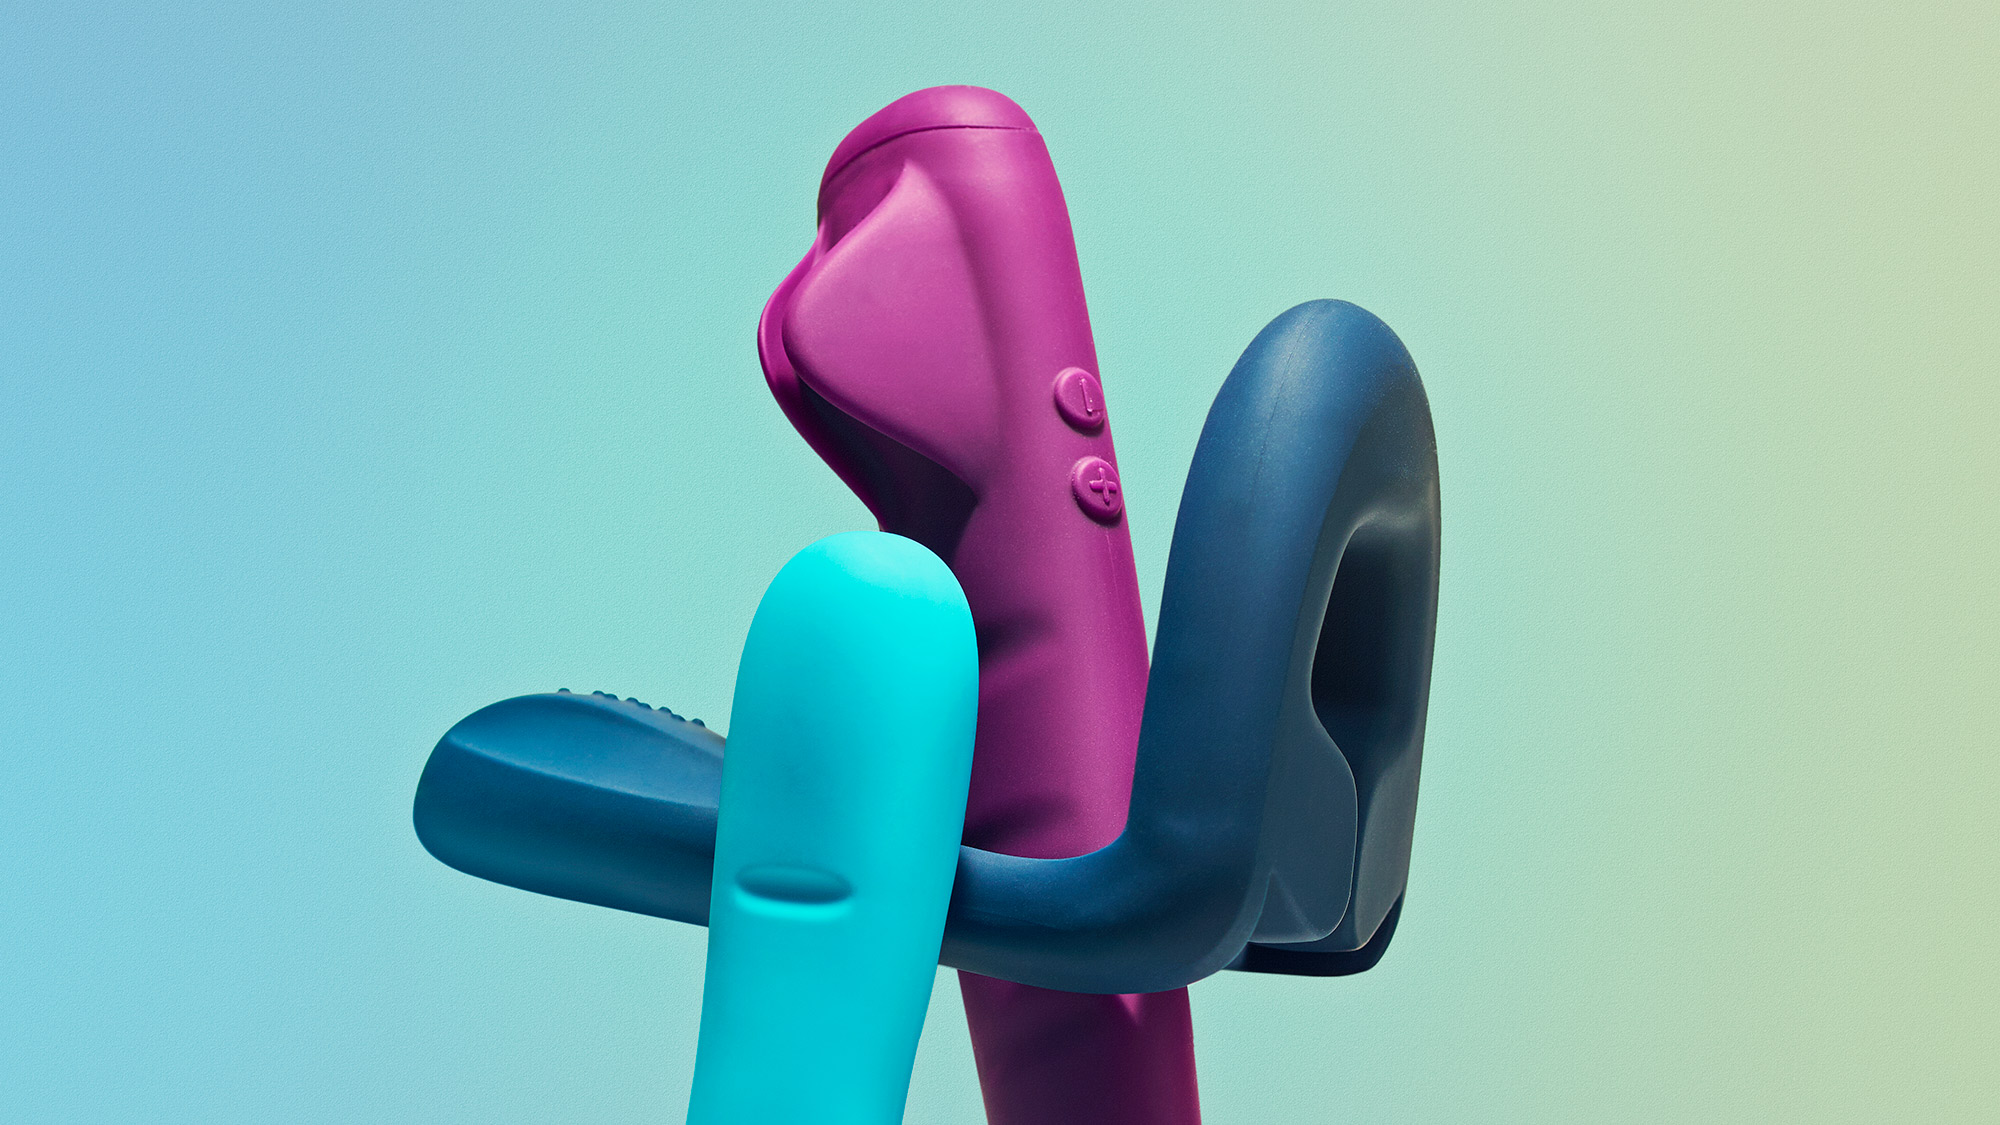 Sex toys engineered to be medical devices Popular Science photo